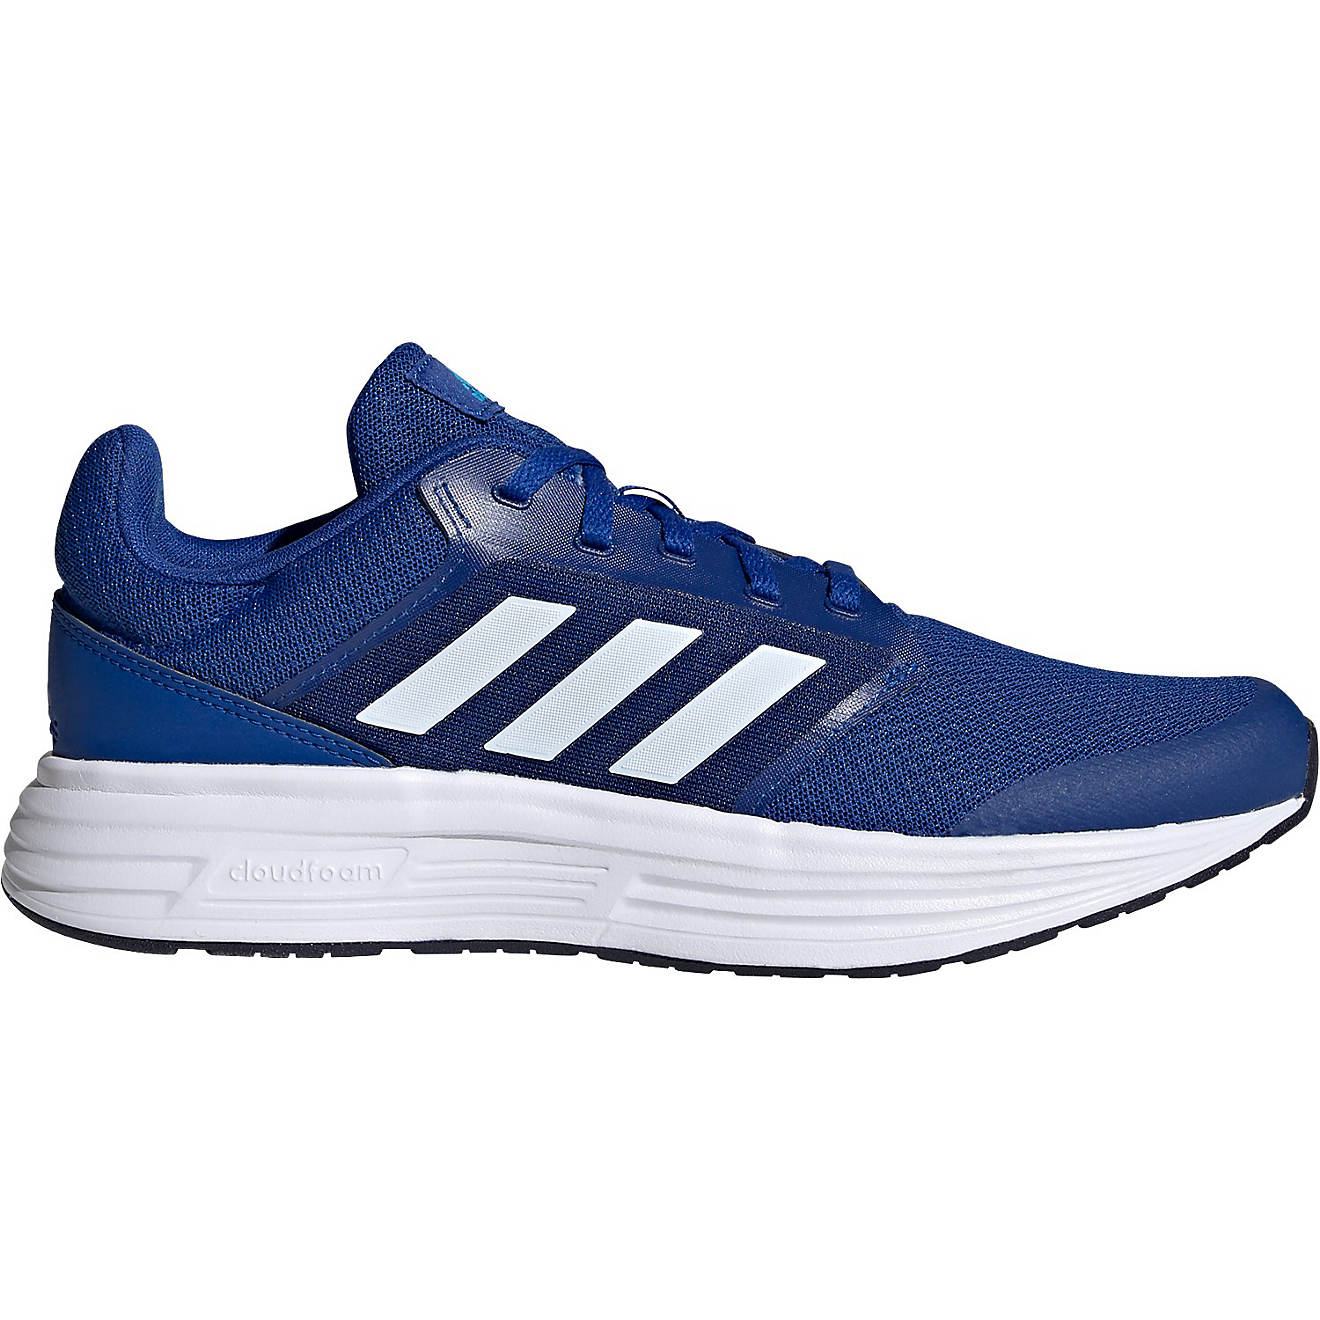 adidas Men's Galaxy 5 Running Shoes on Sale At Academy Sports + Outdoors